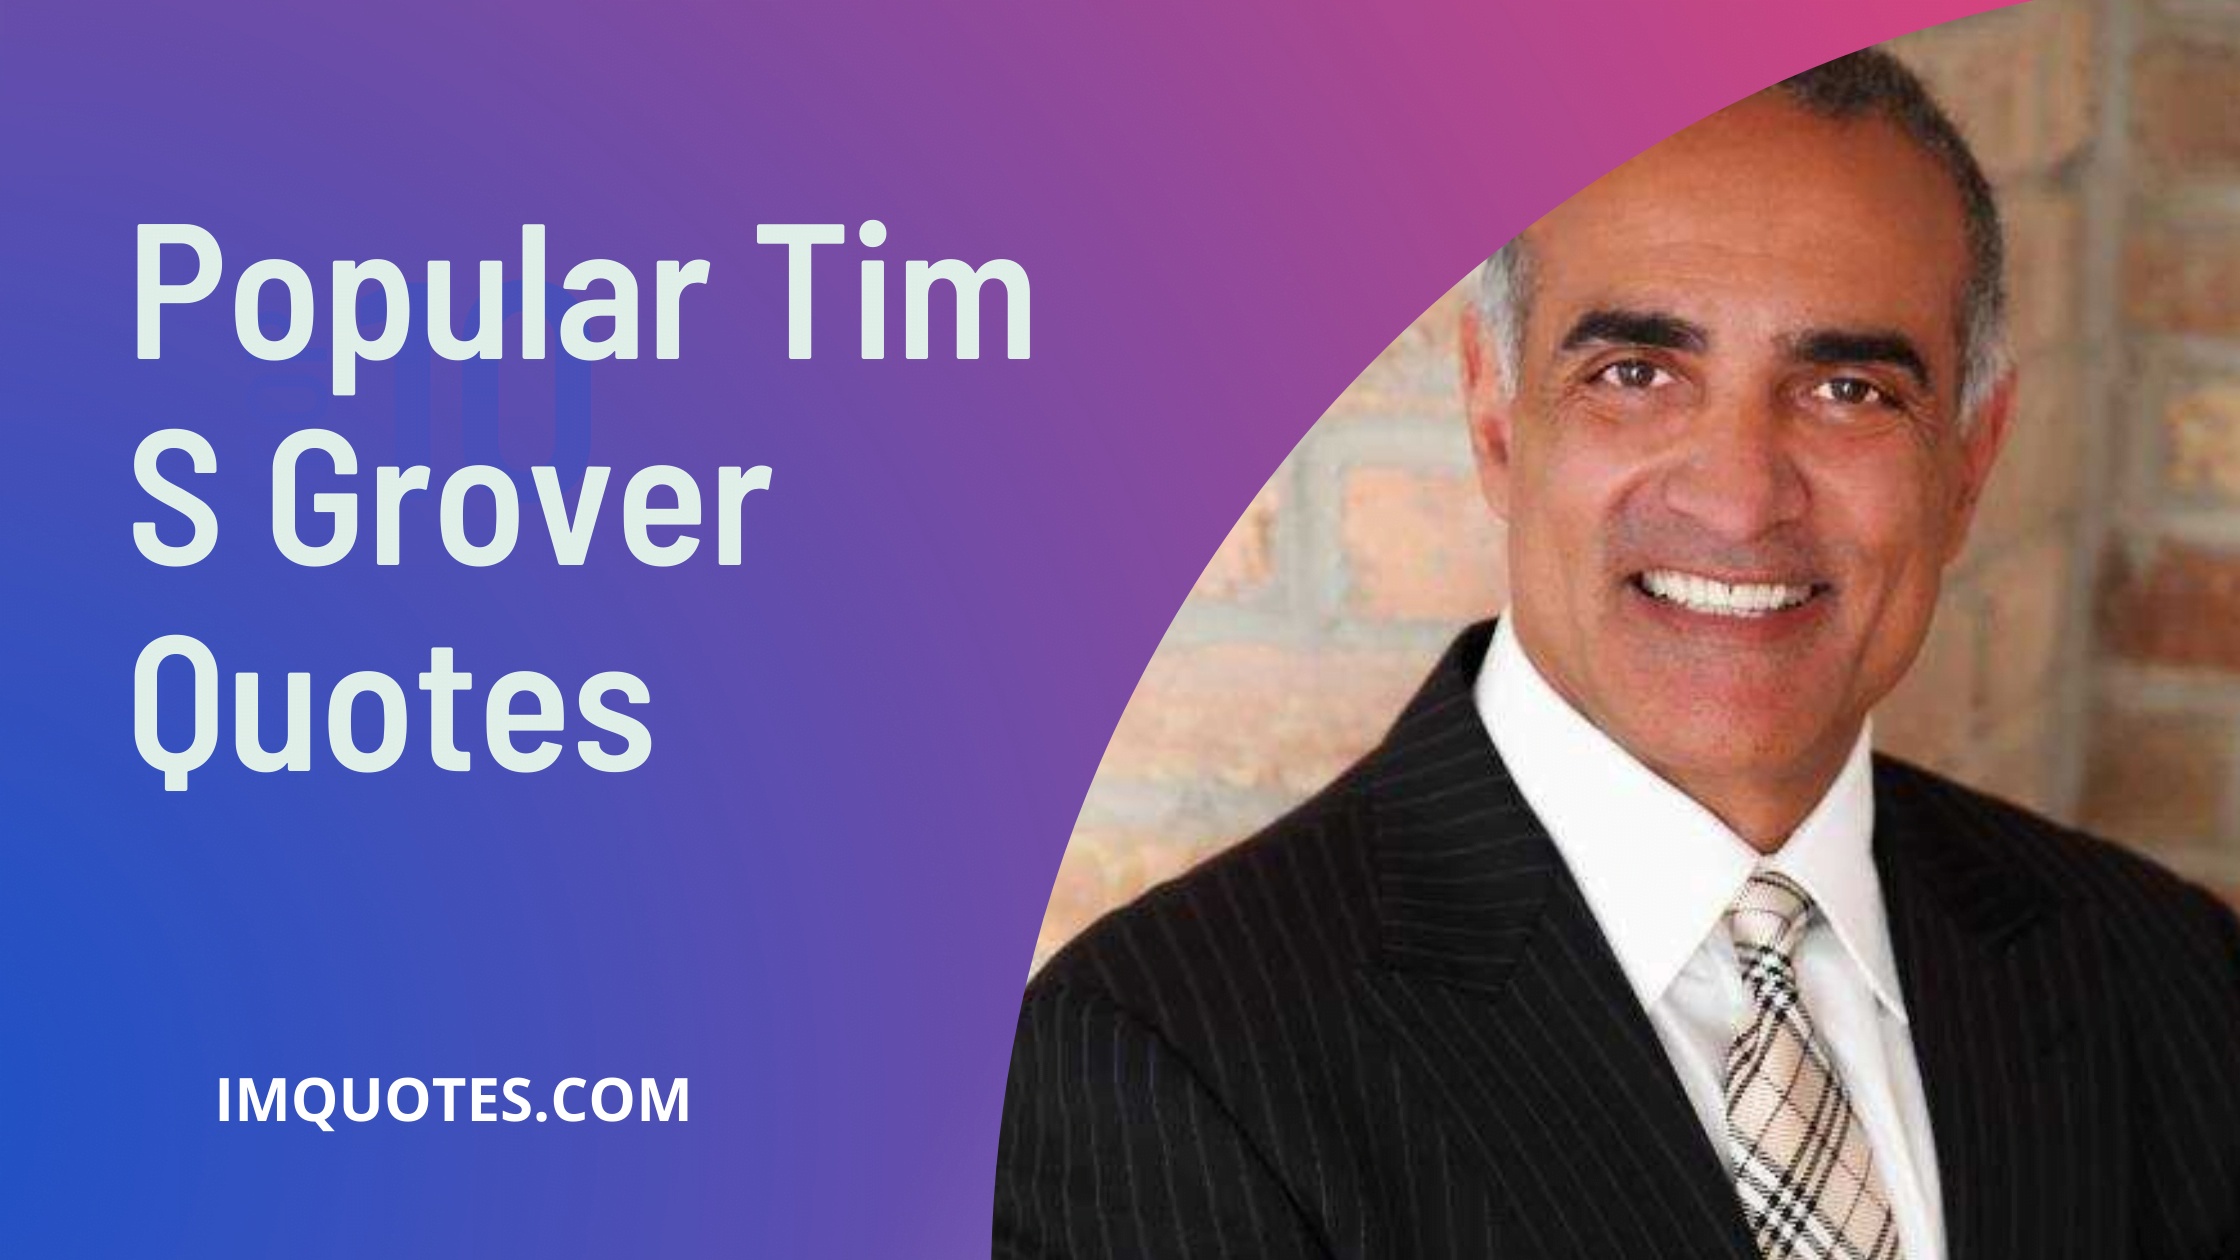 Popular Tim S Grover Quotes